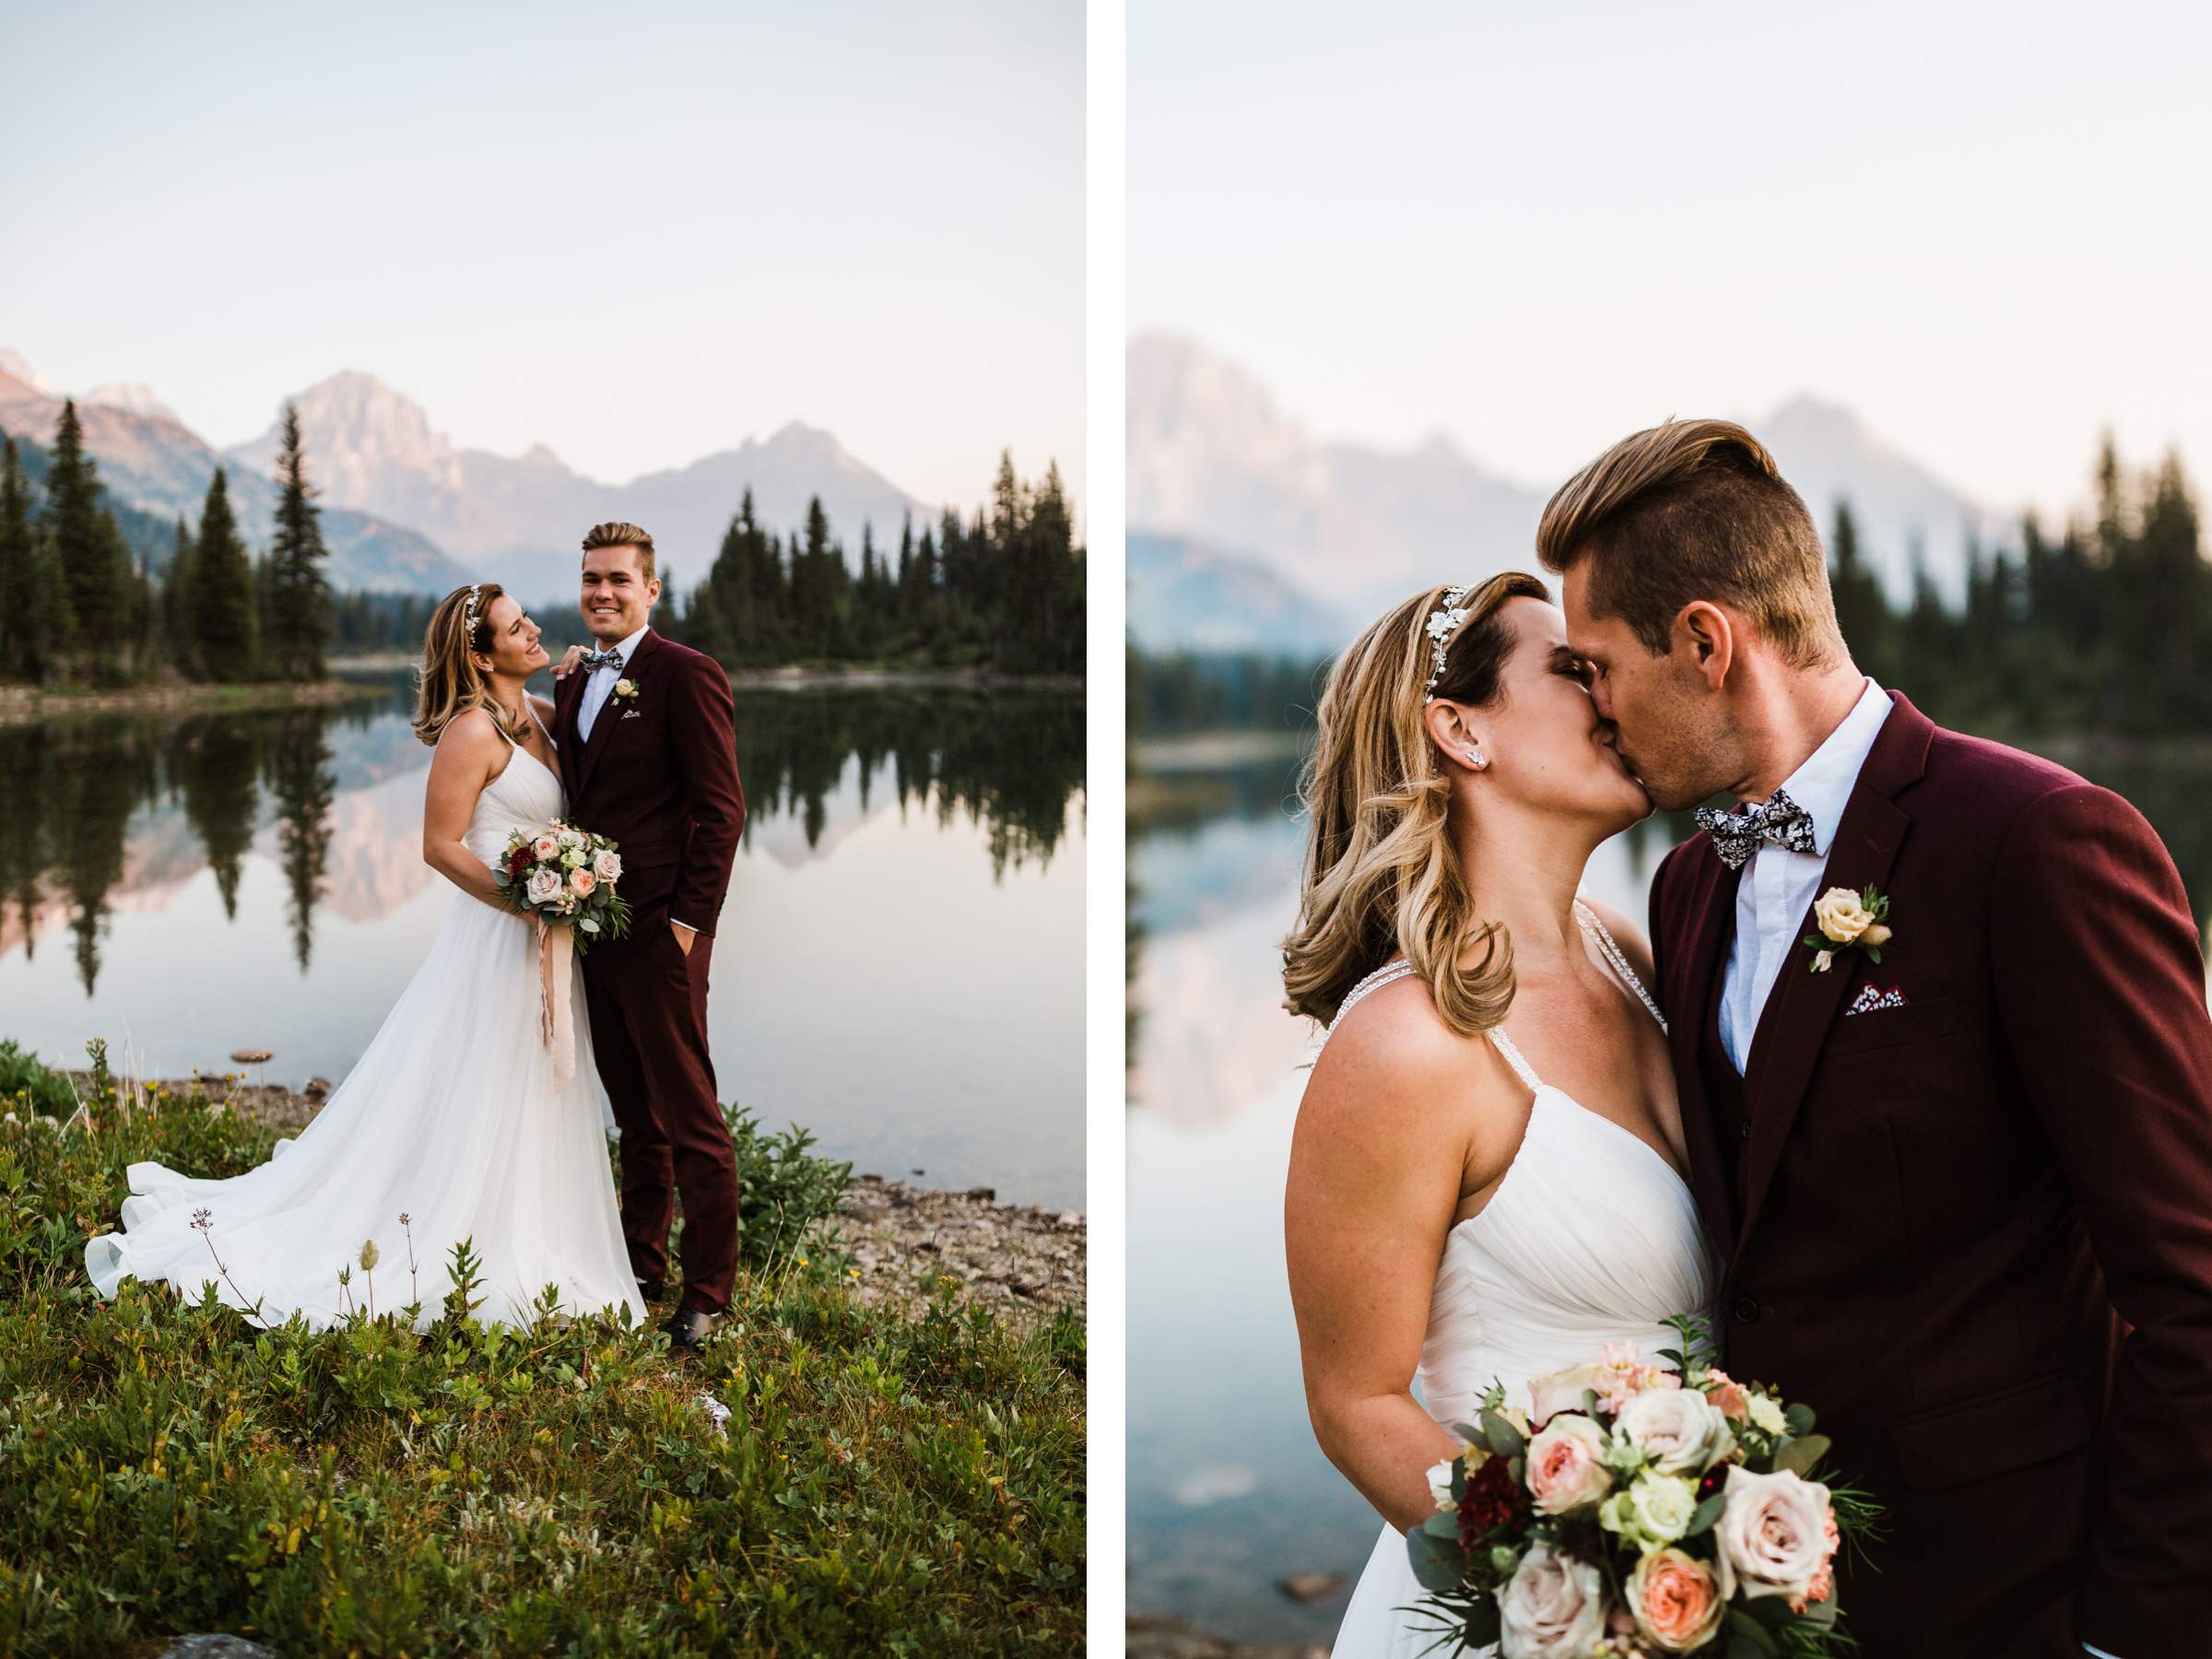 Banff Helicopter Elopement Photographers - Image 11